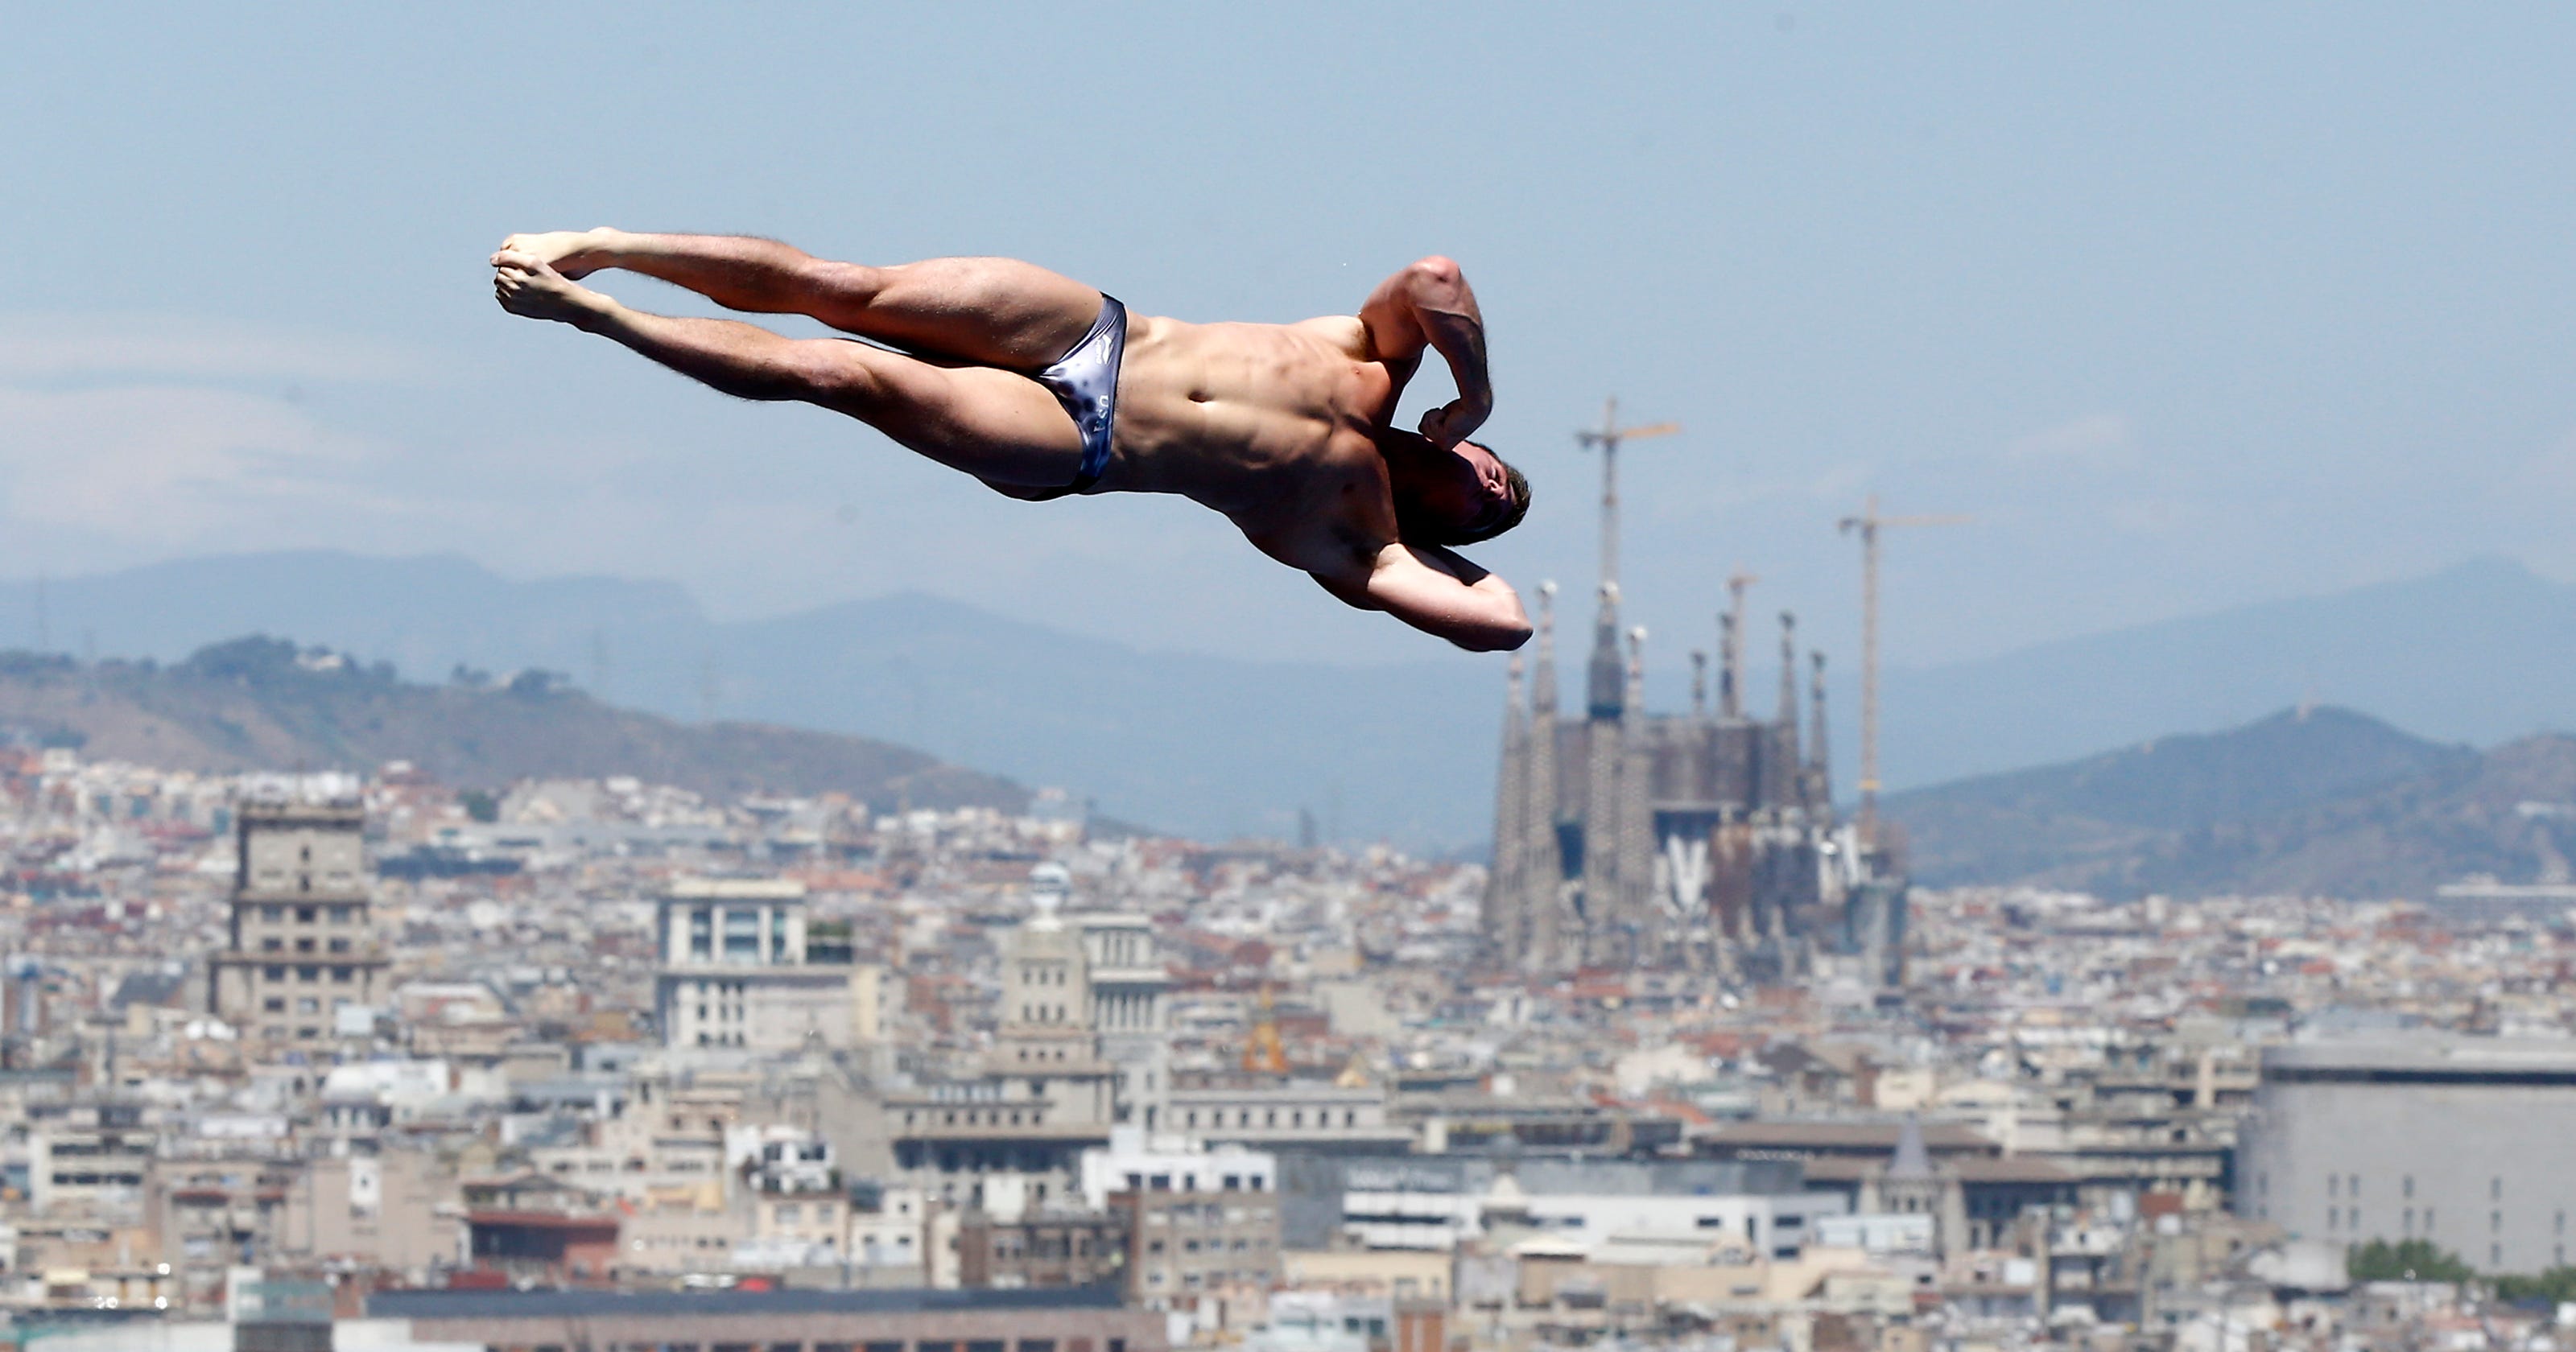 Five Things To Watch As Olympic Diving Trials Begin